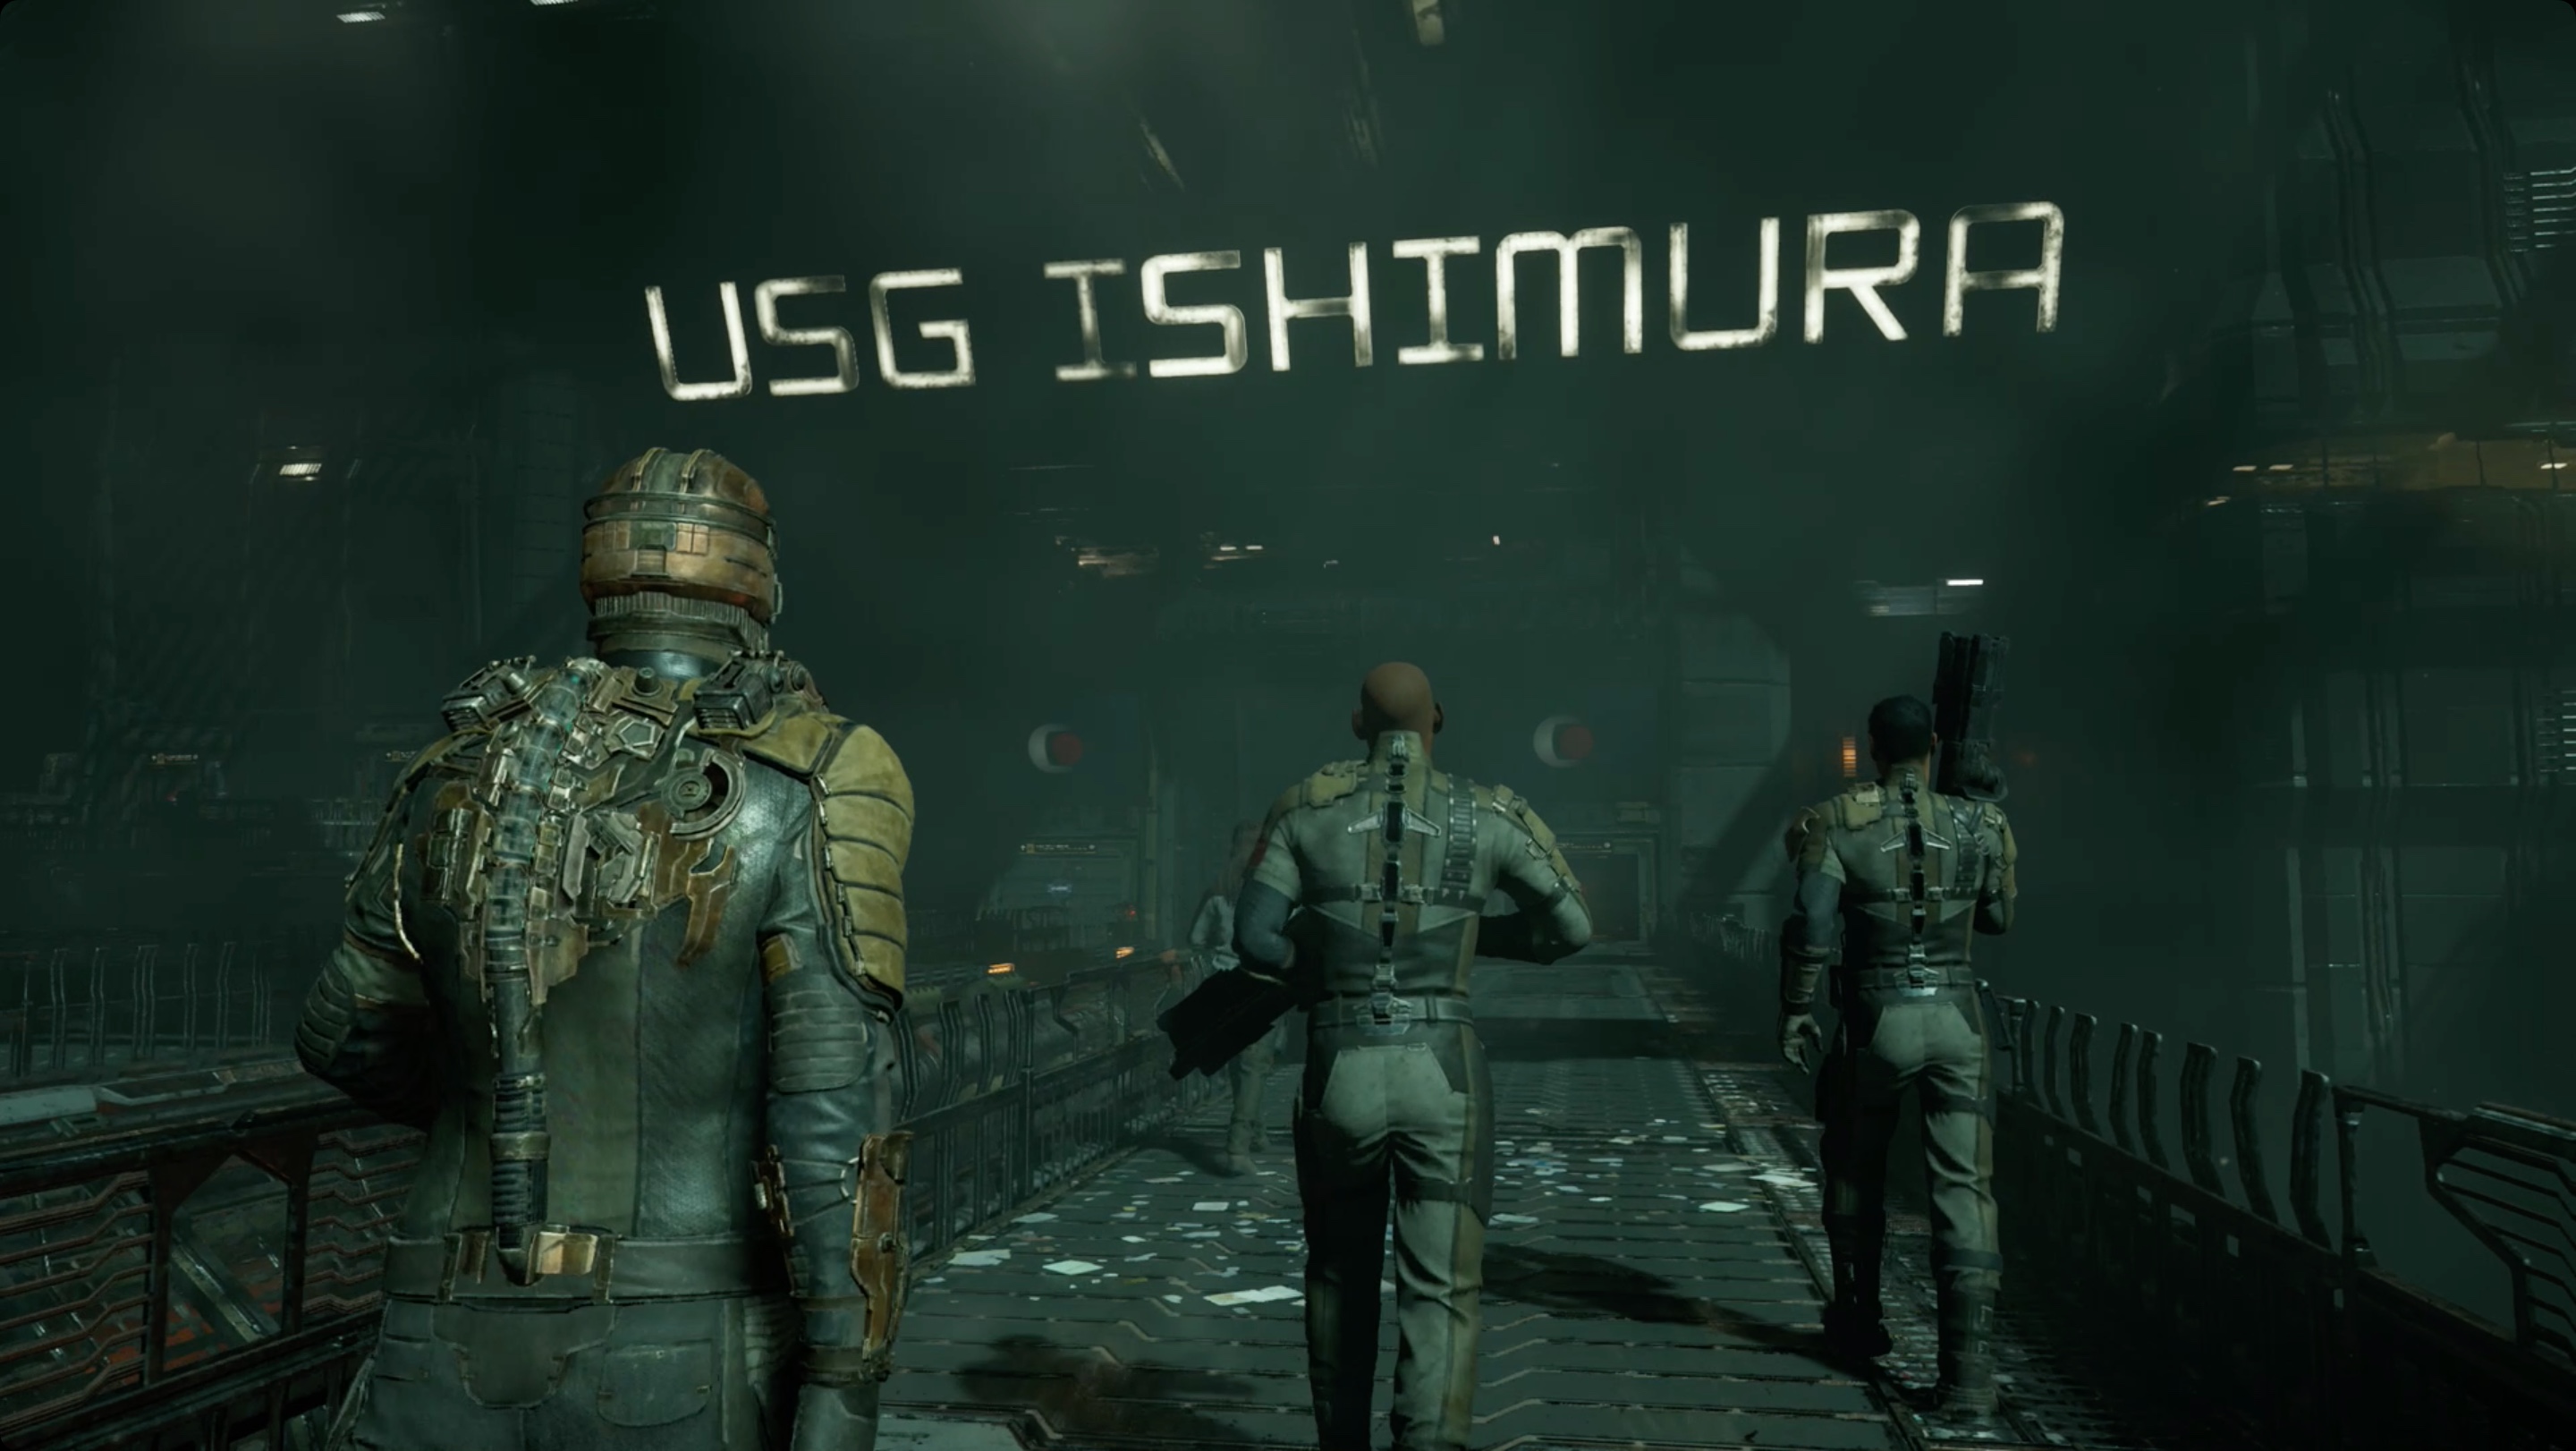 Dead Space Isaac and the crew of the Kellion board the USG Ishimura.